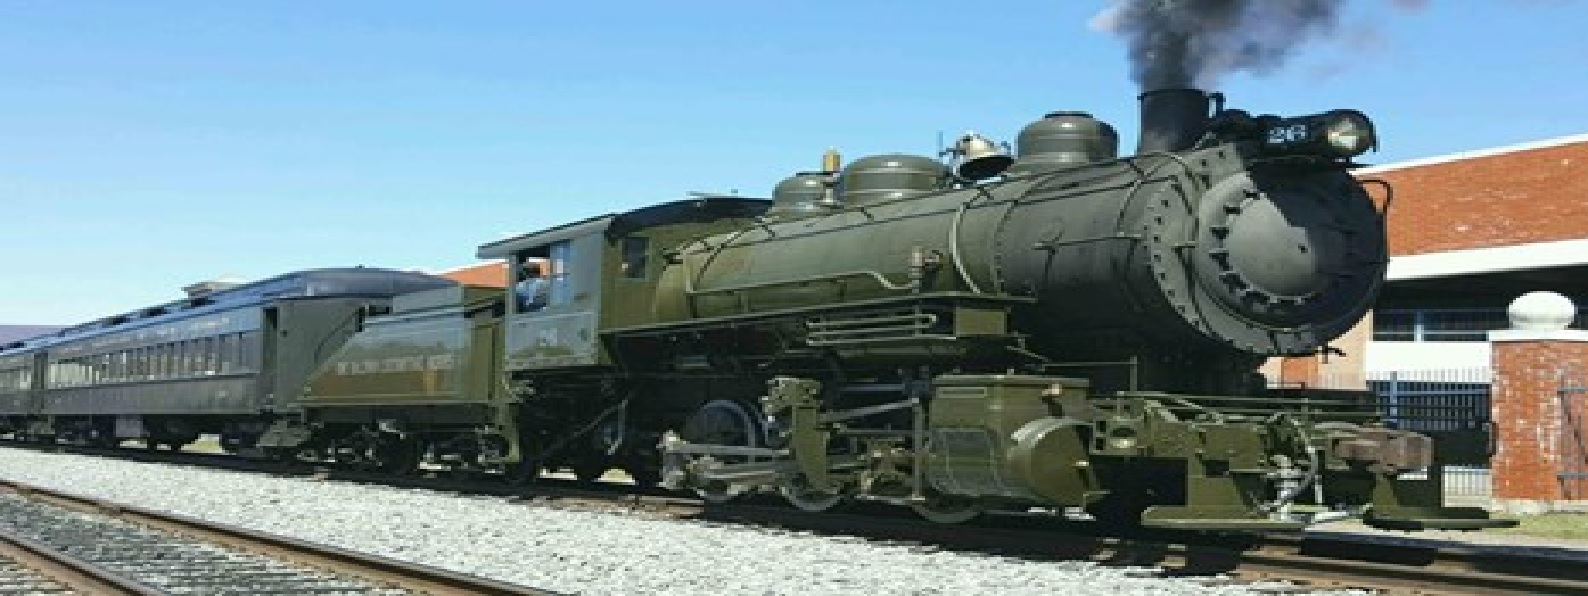 The Steamtown National Historic Site